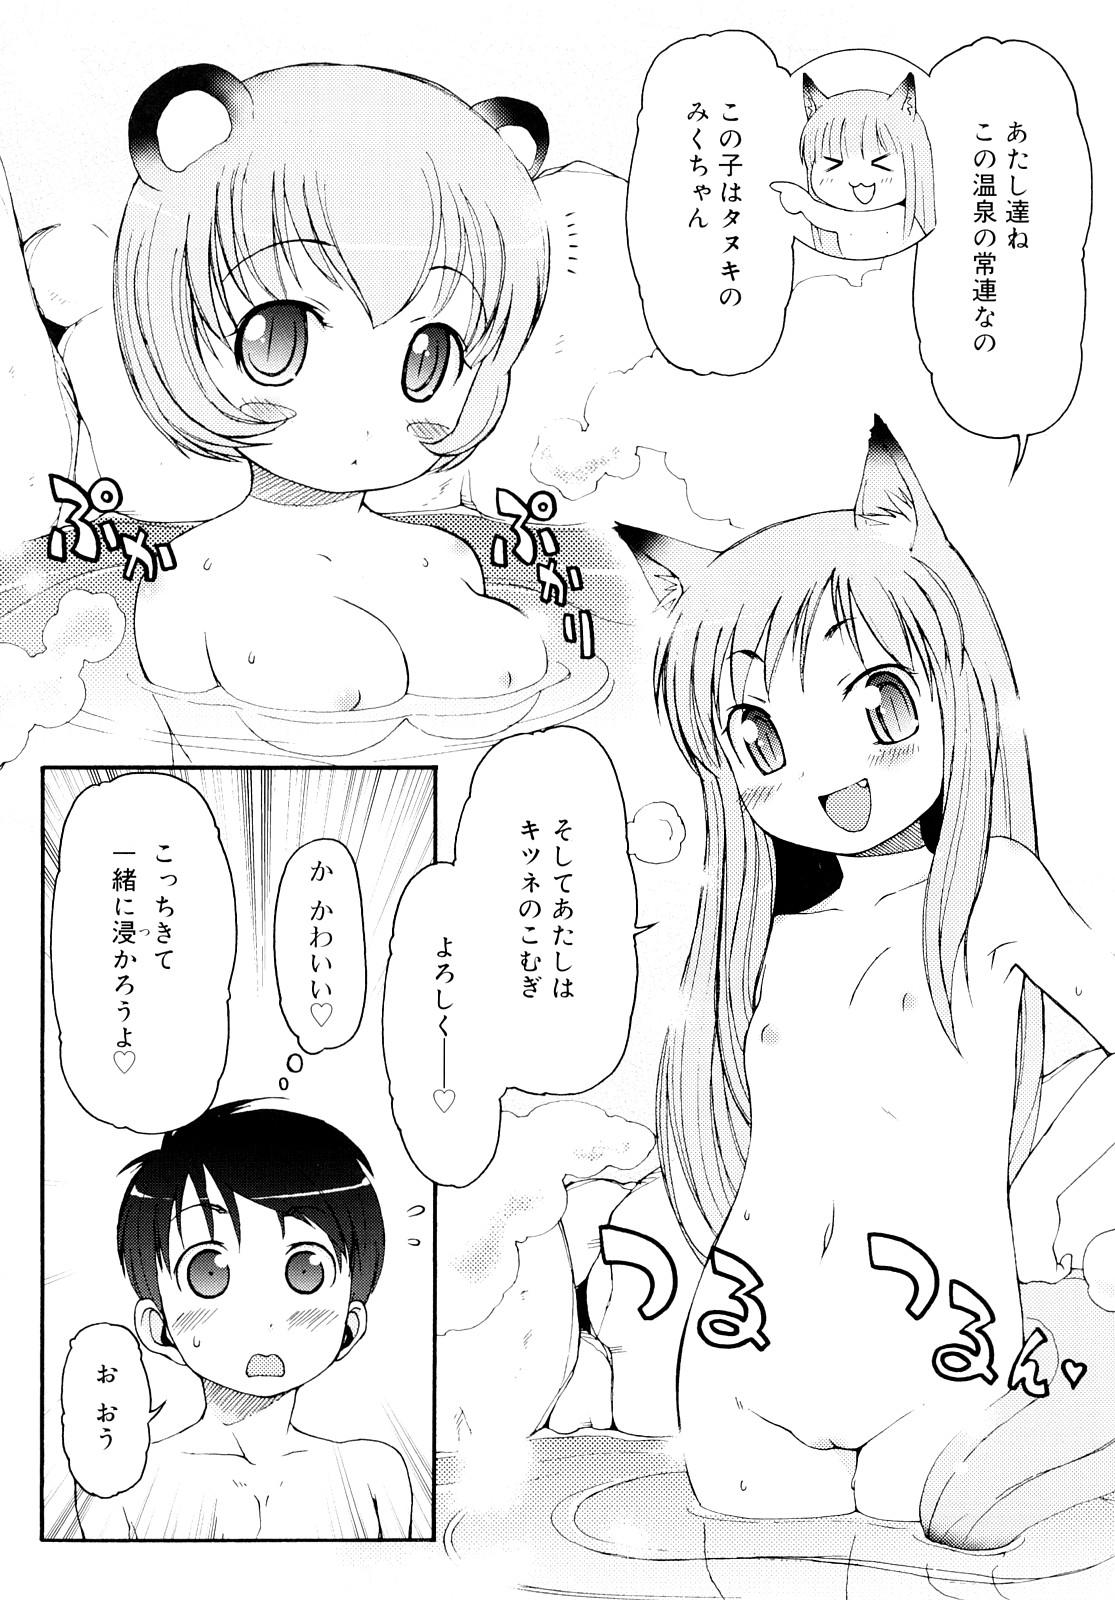 Best Blowjobs Ever Kemomimi Onsen e Youkoso - Welcome to Kemomimi Onsen Pay - Page 8